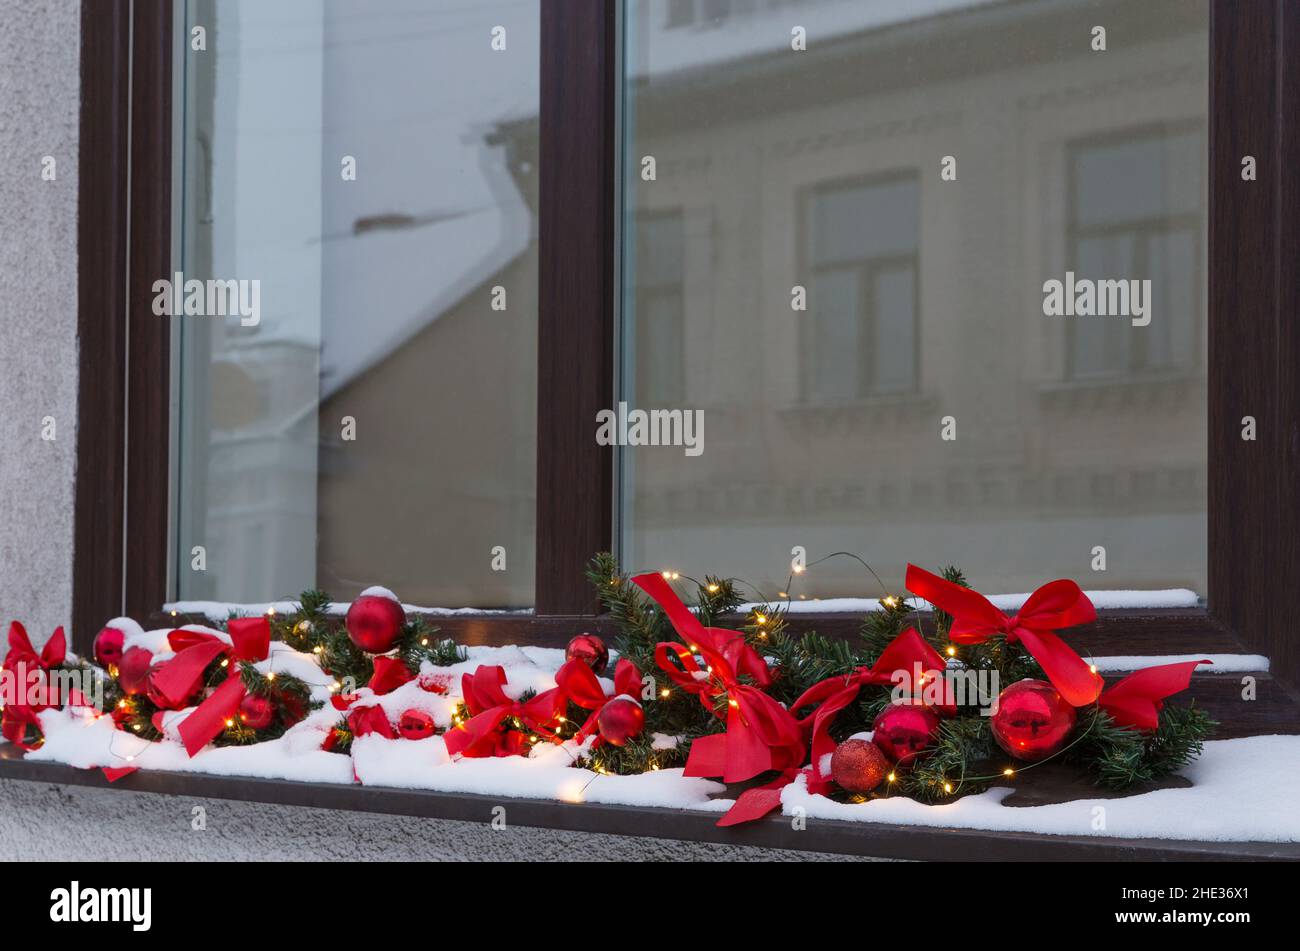 New year and christmas concept, decorated window with garlands of red ribbons and lights Stock Photo